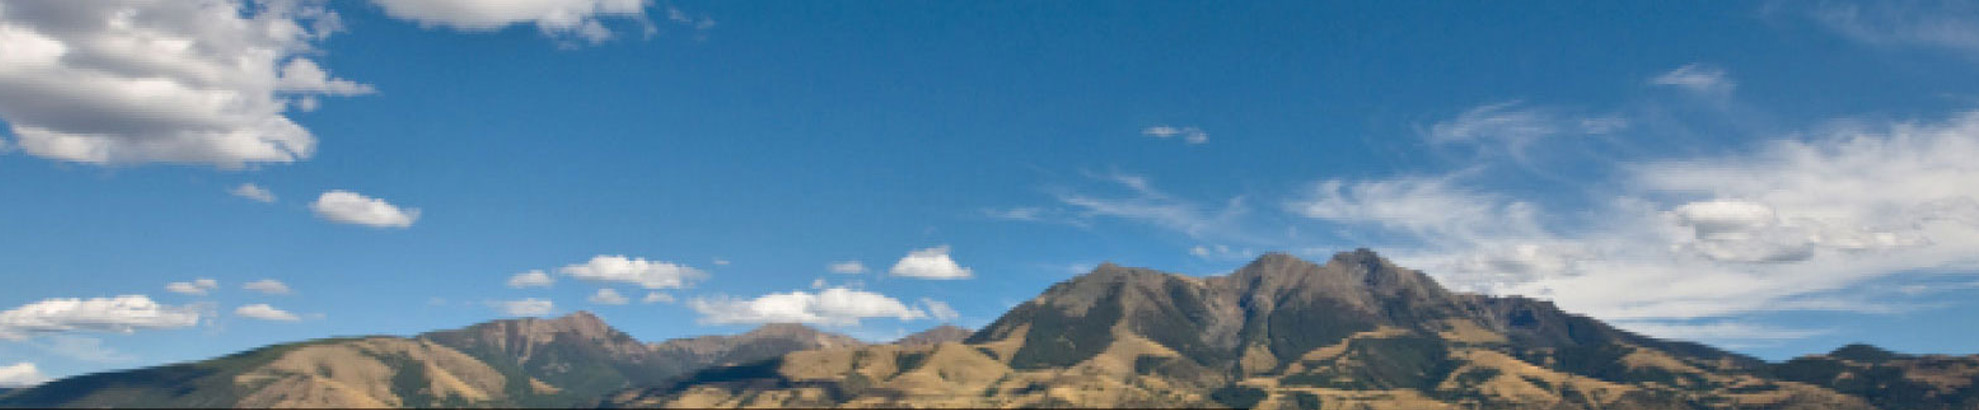 Mountains with blue sky